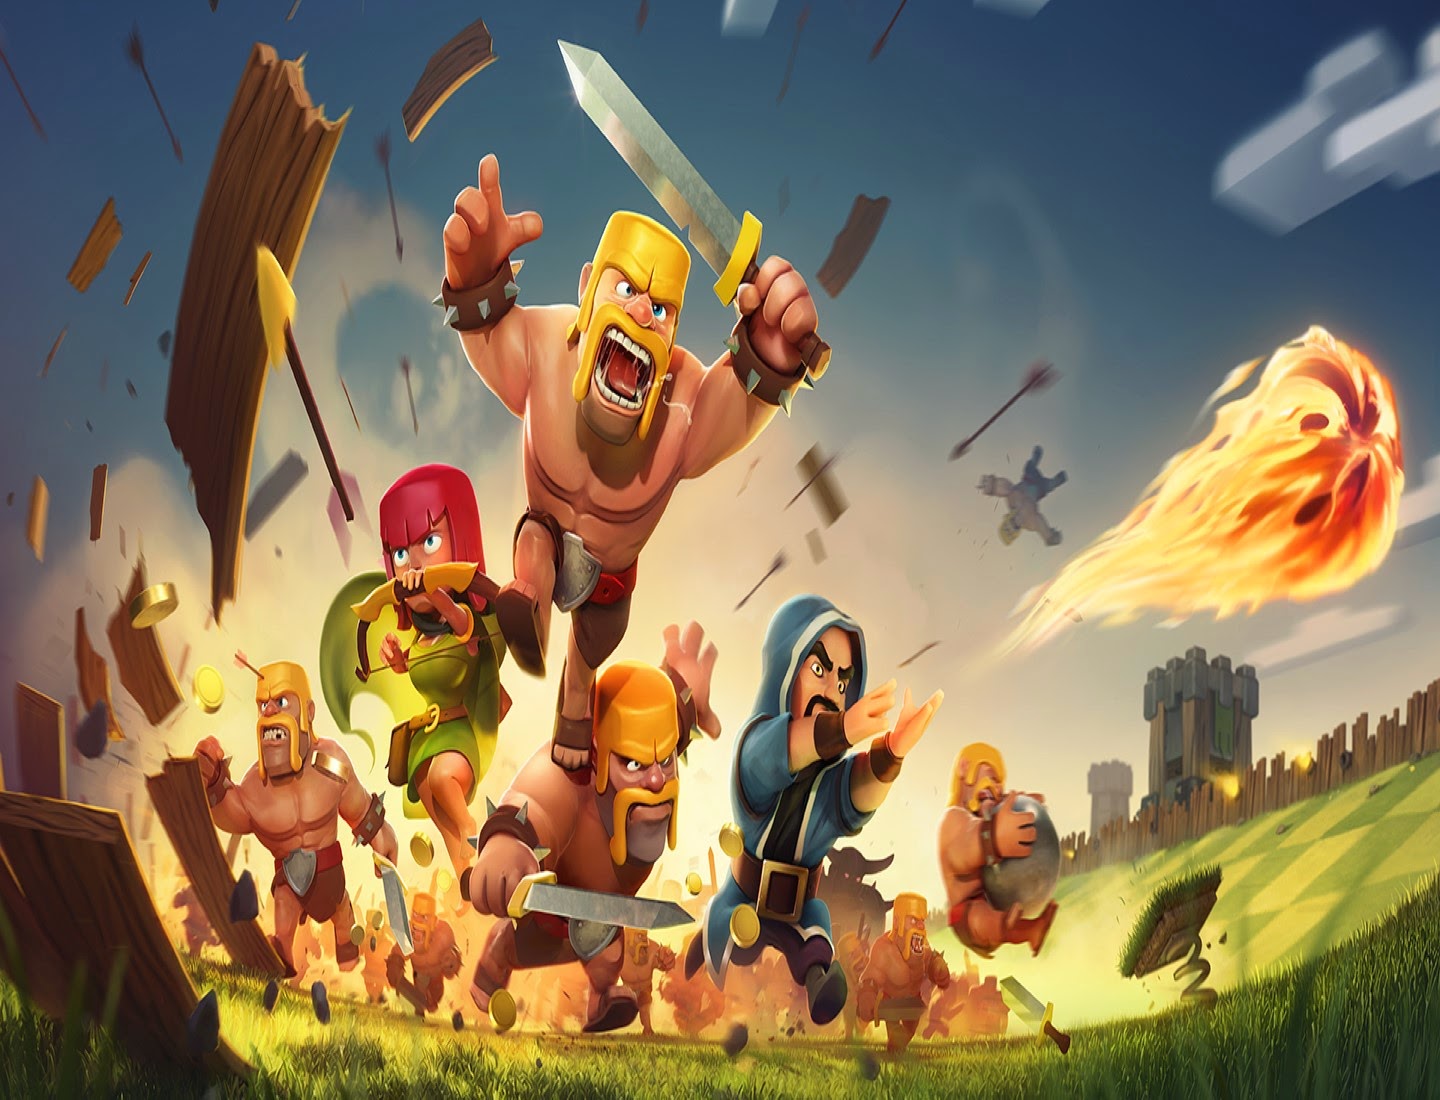 unlimited gems in clash of clans no survey